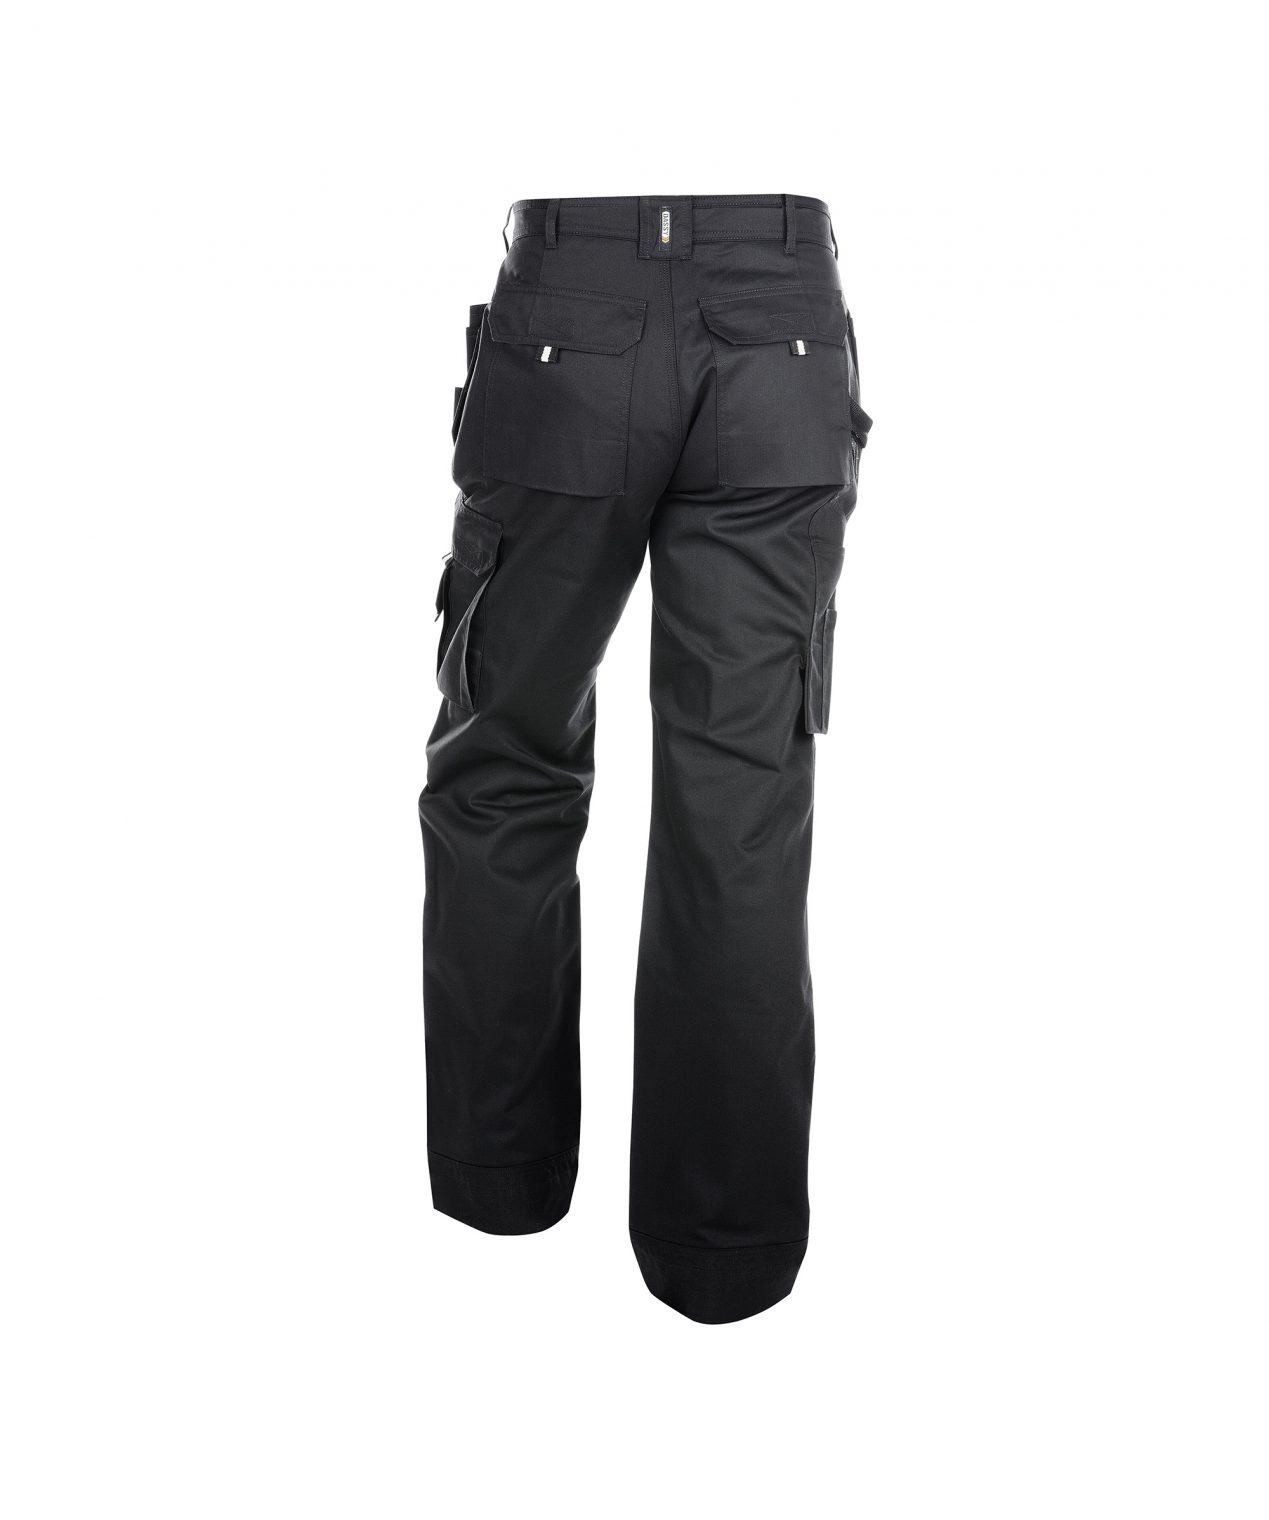 oxford trousers with holster pockets and knee pockets black back